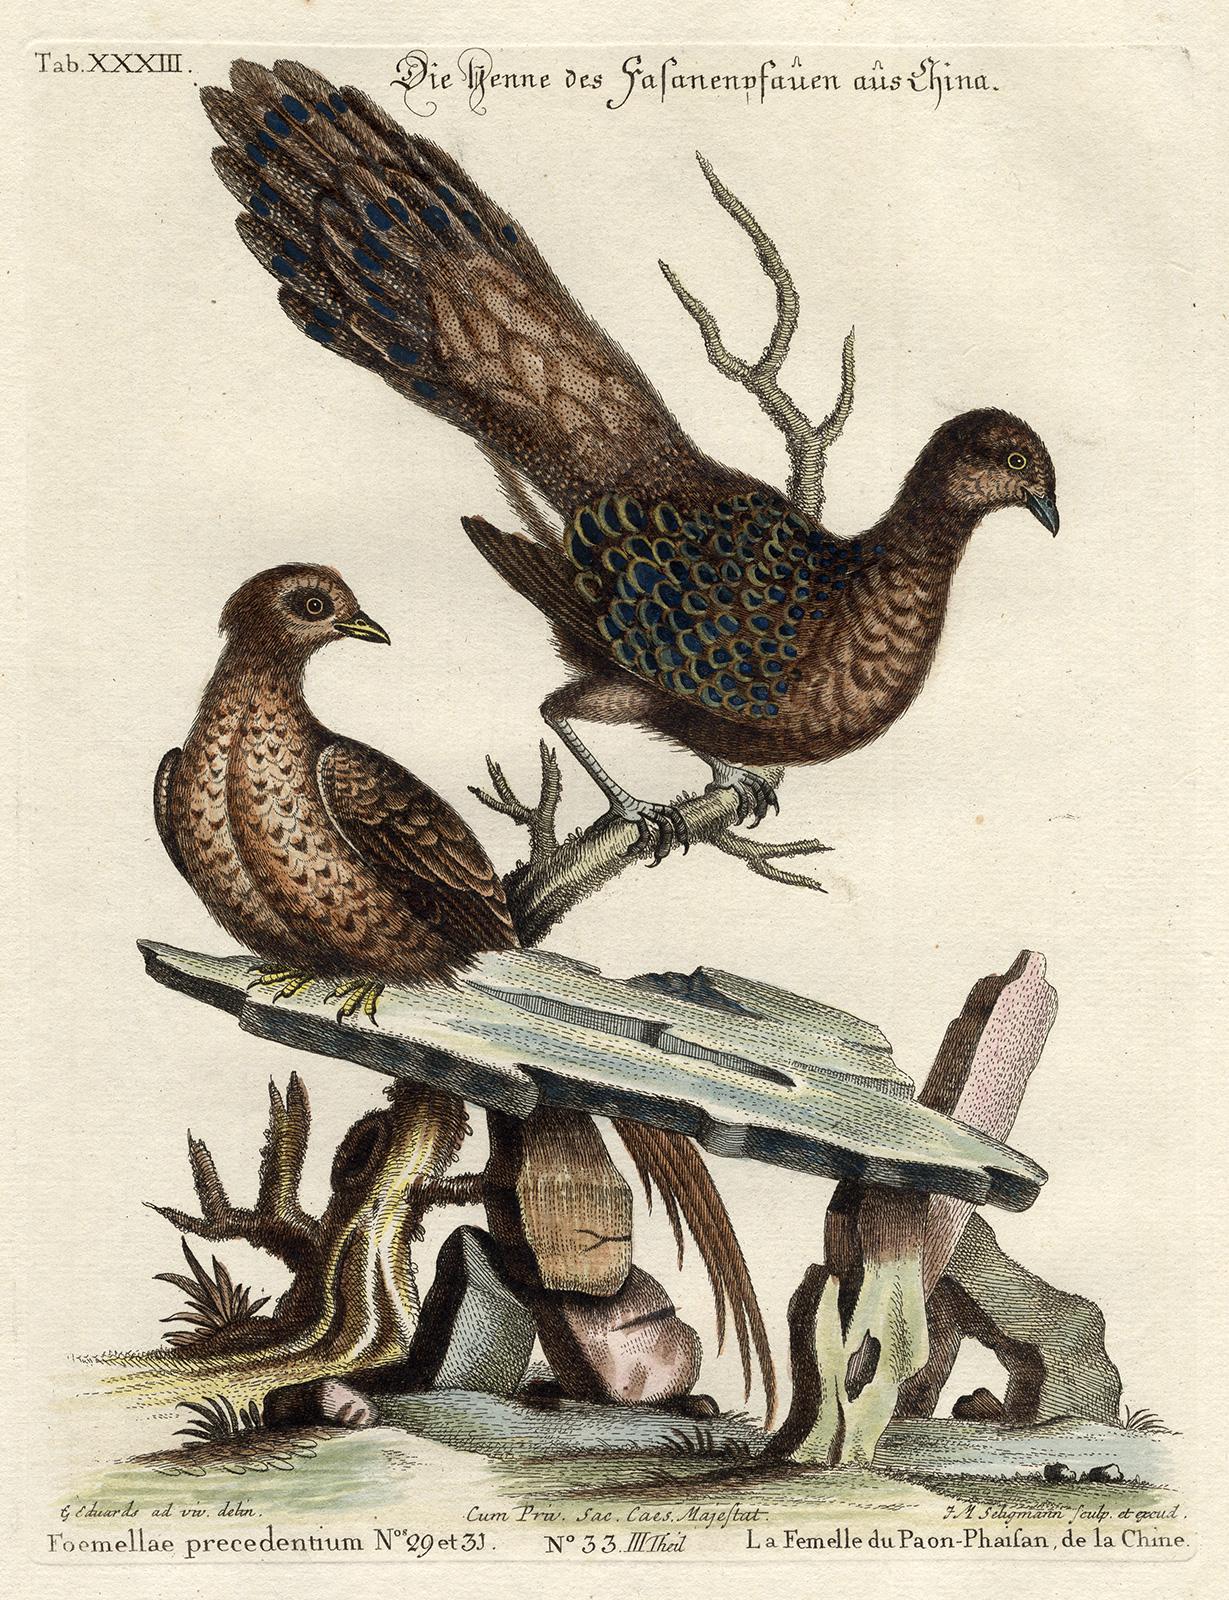 A Chinese Peacock-pheasant by Seligmann - Handcoloured etching - 18th century - Print by Johann Michael Seligmann